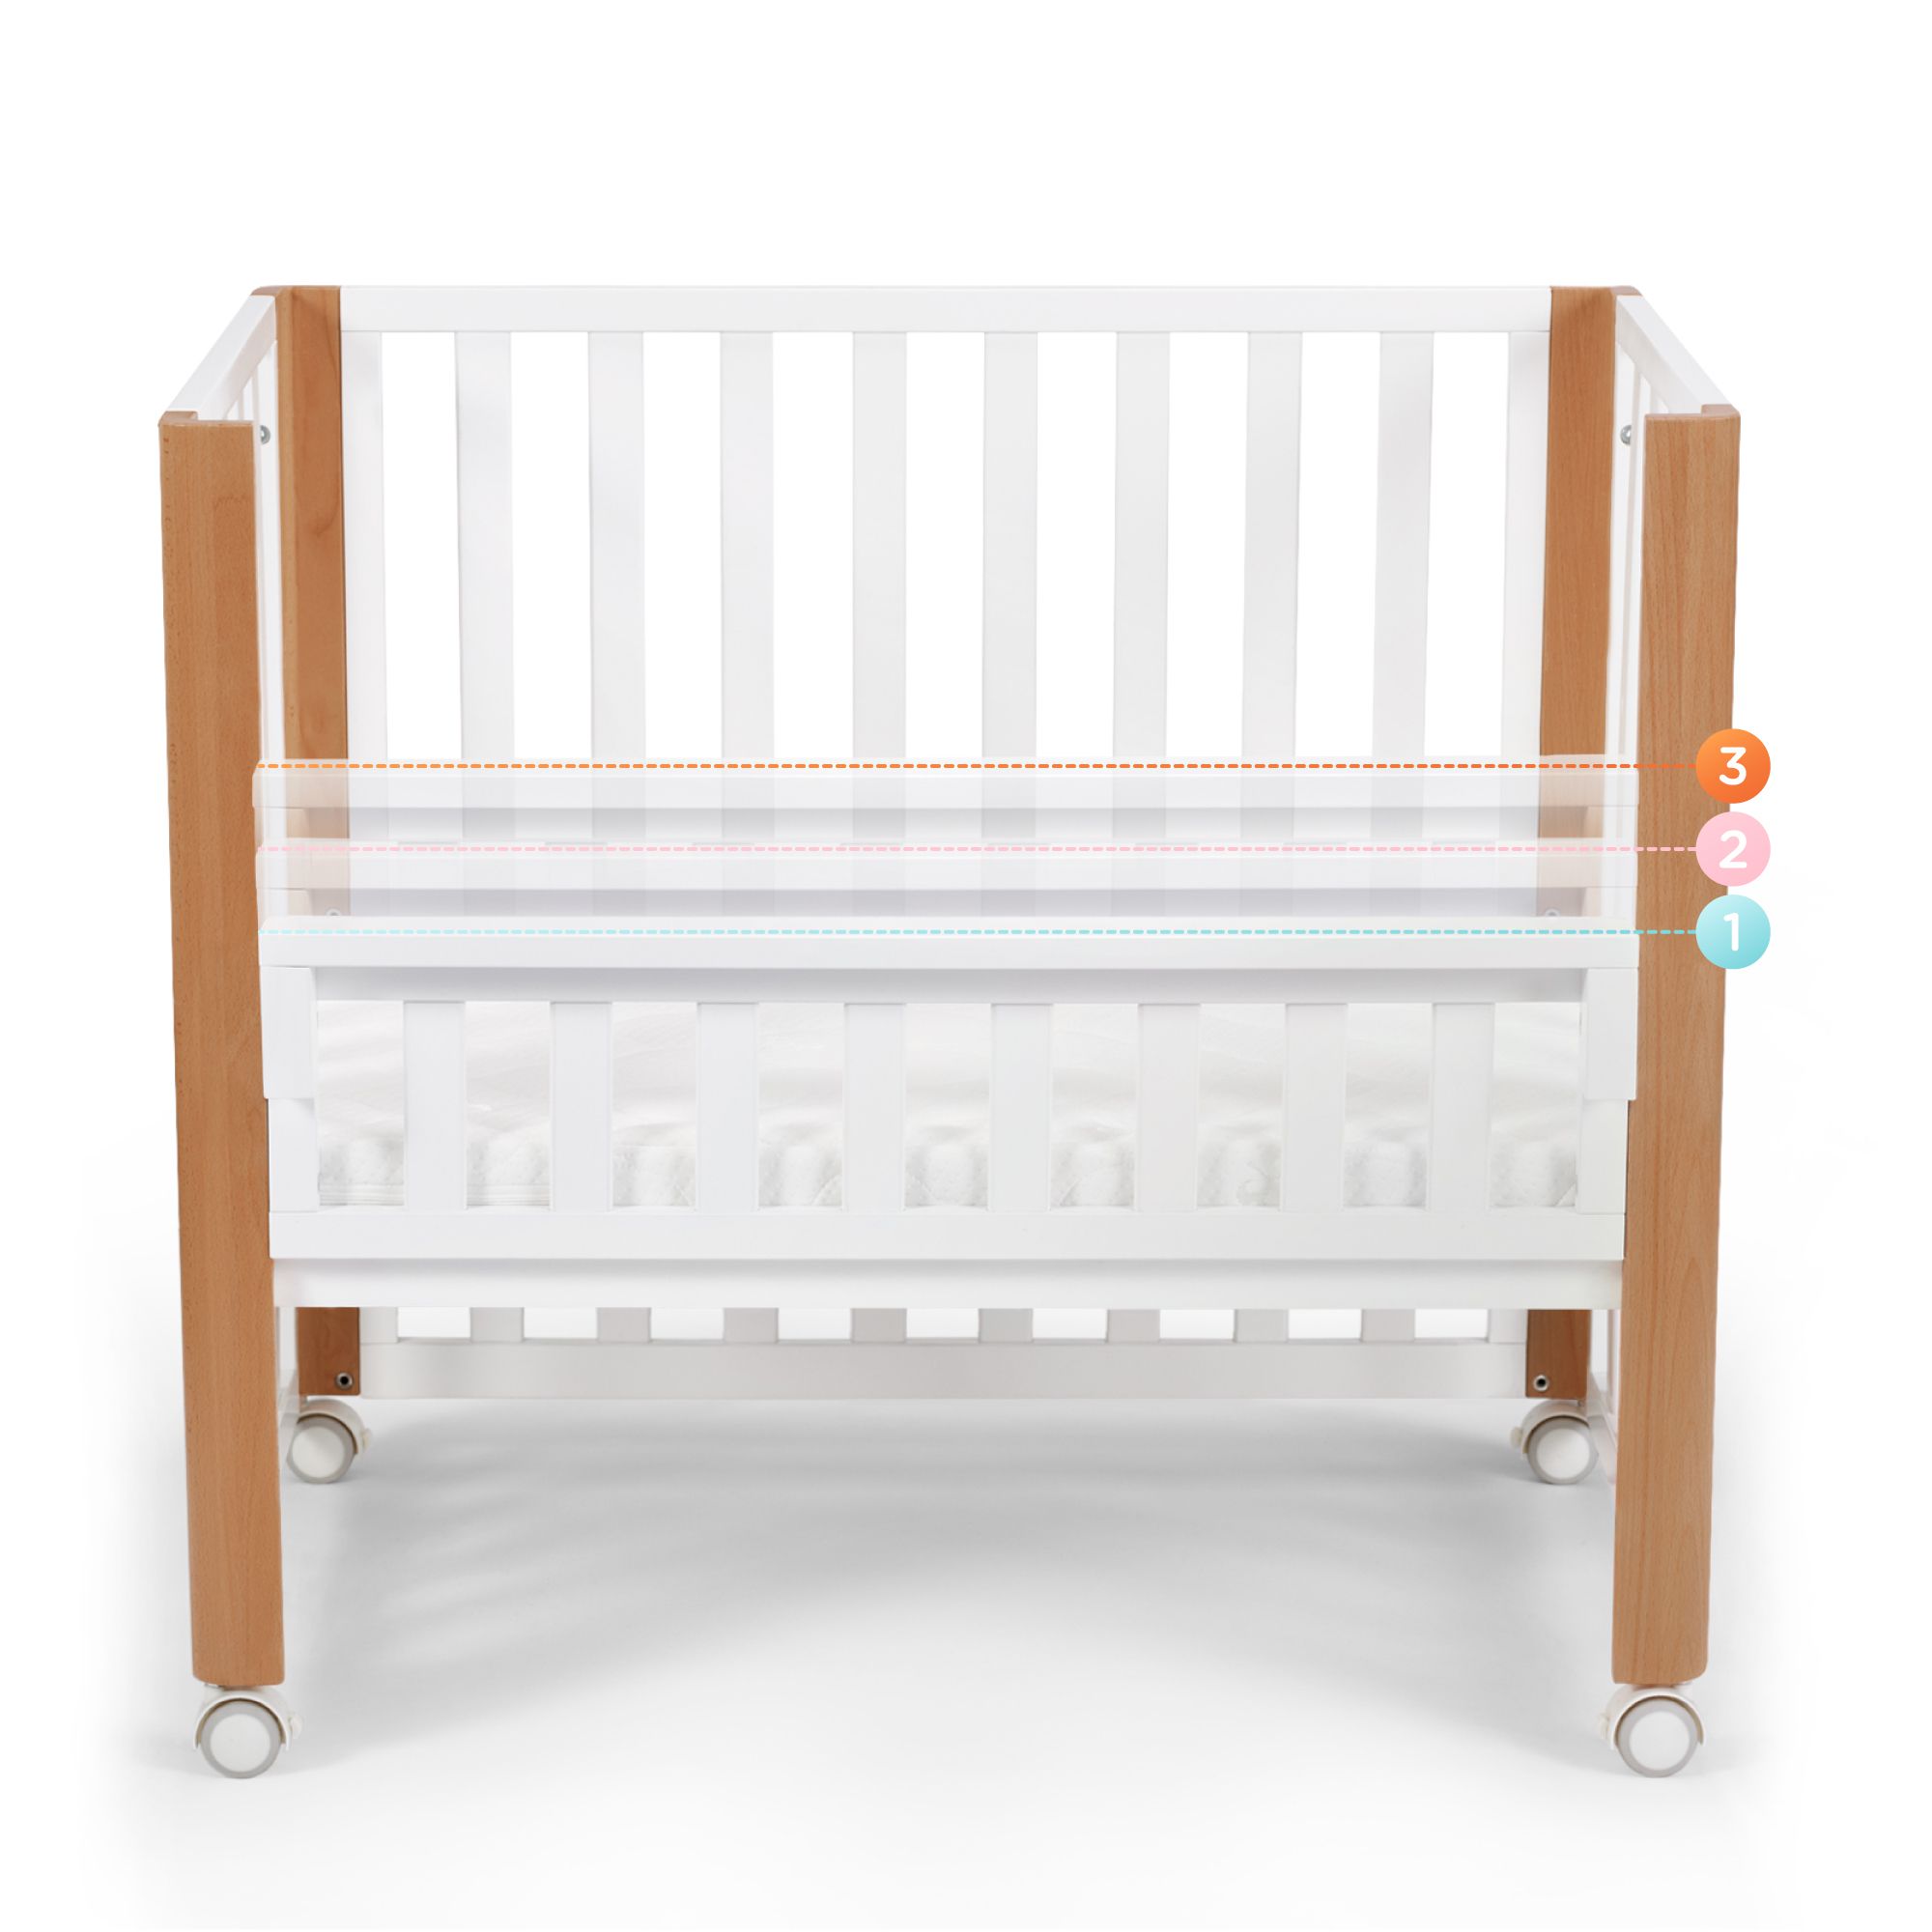 Bottom height adjustment of the co-sleeper cot.